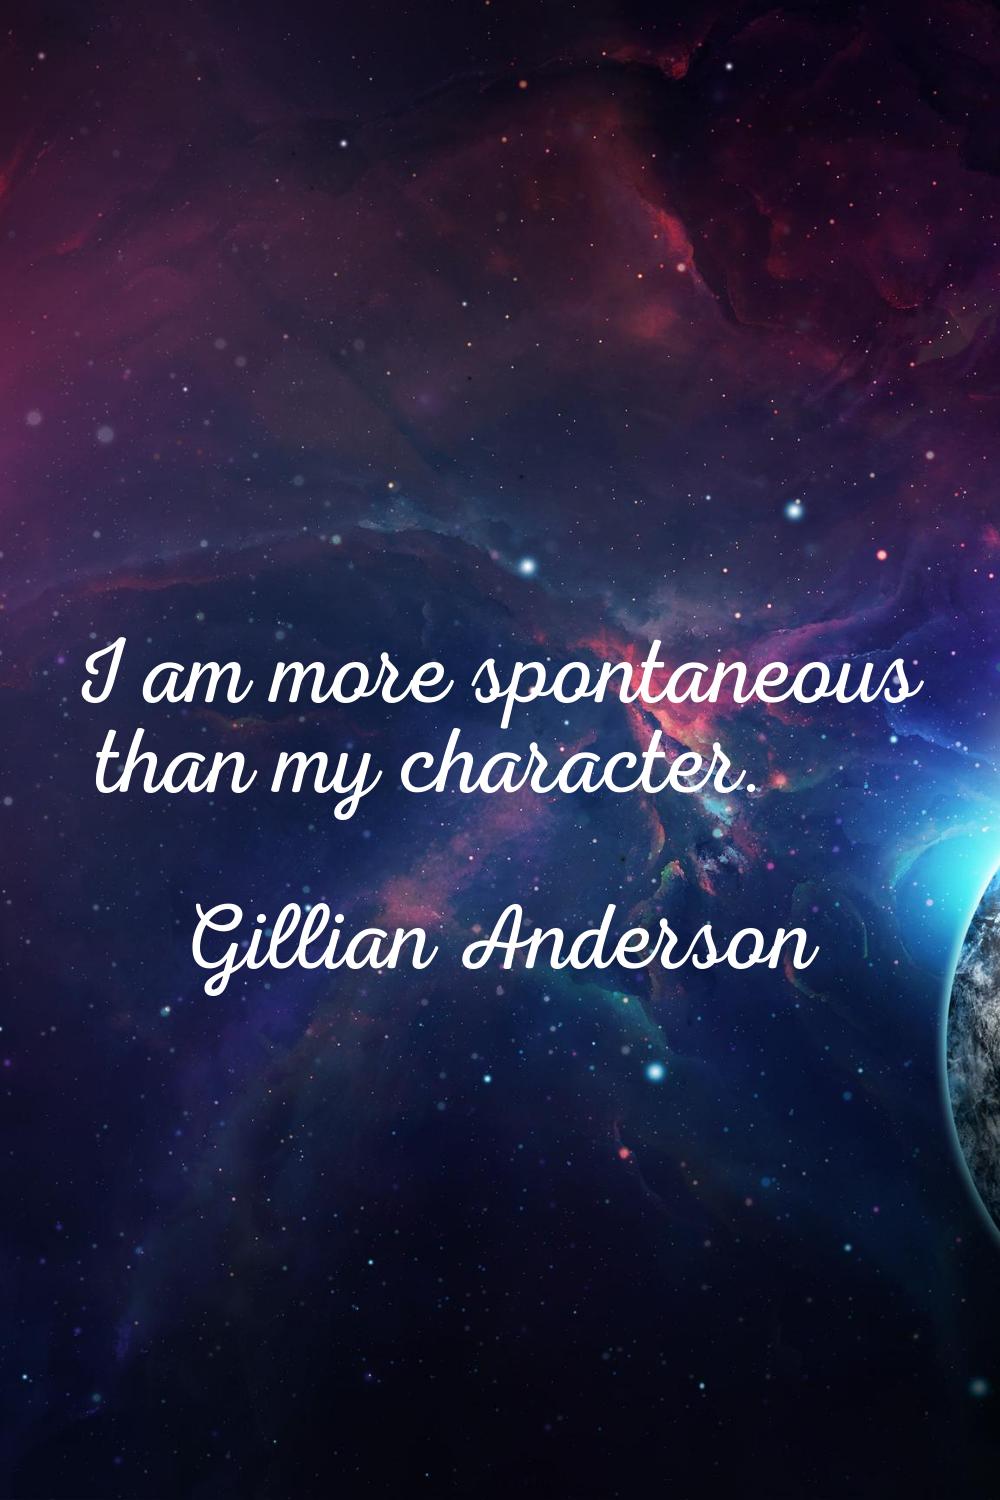 I am more spontaneous than my character.